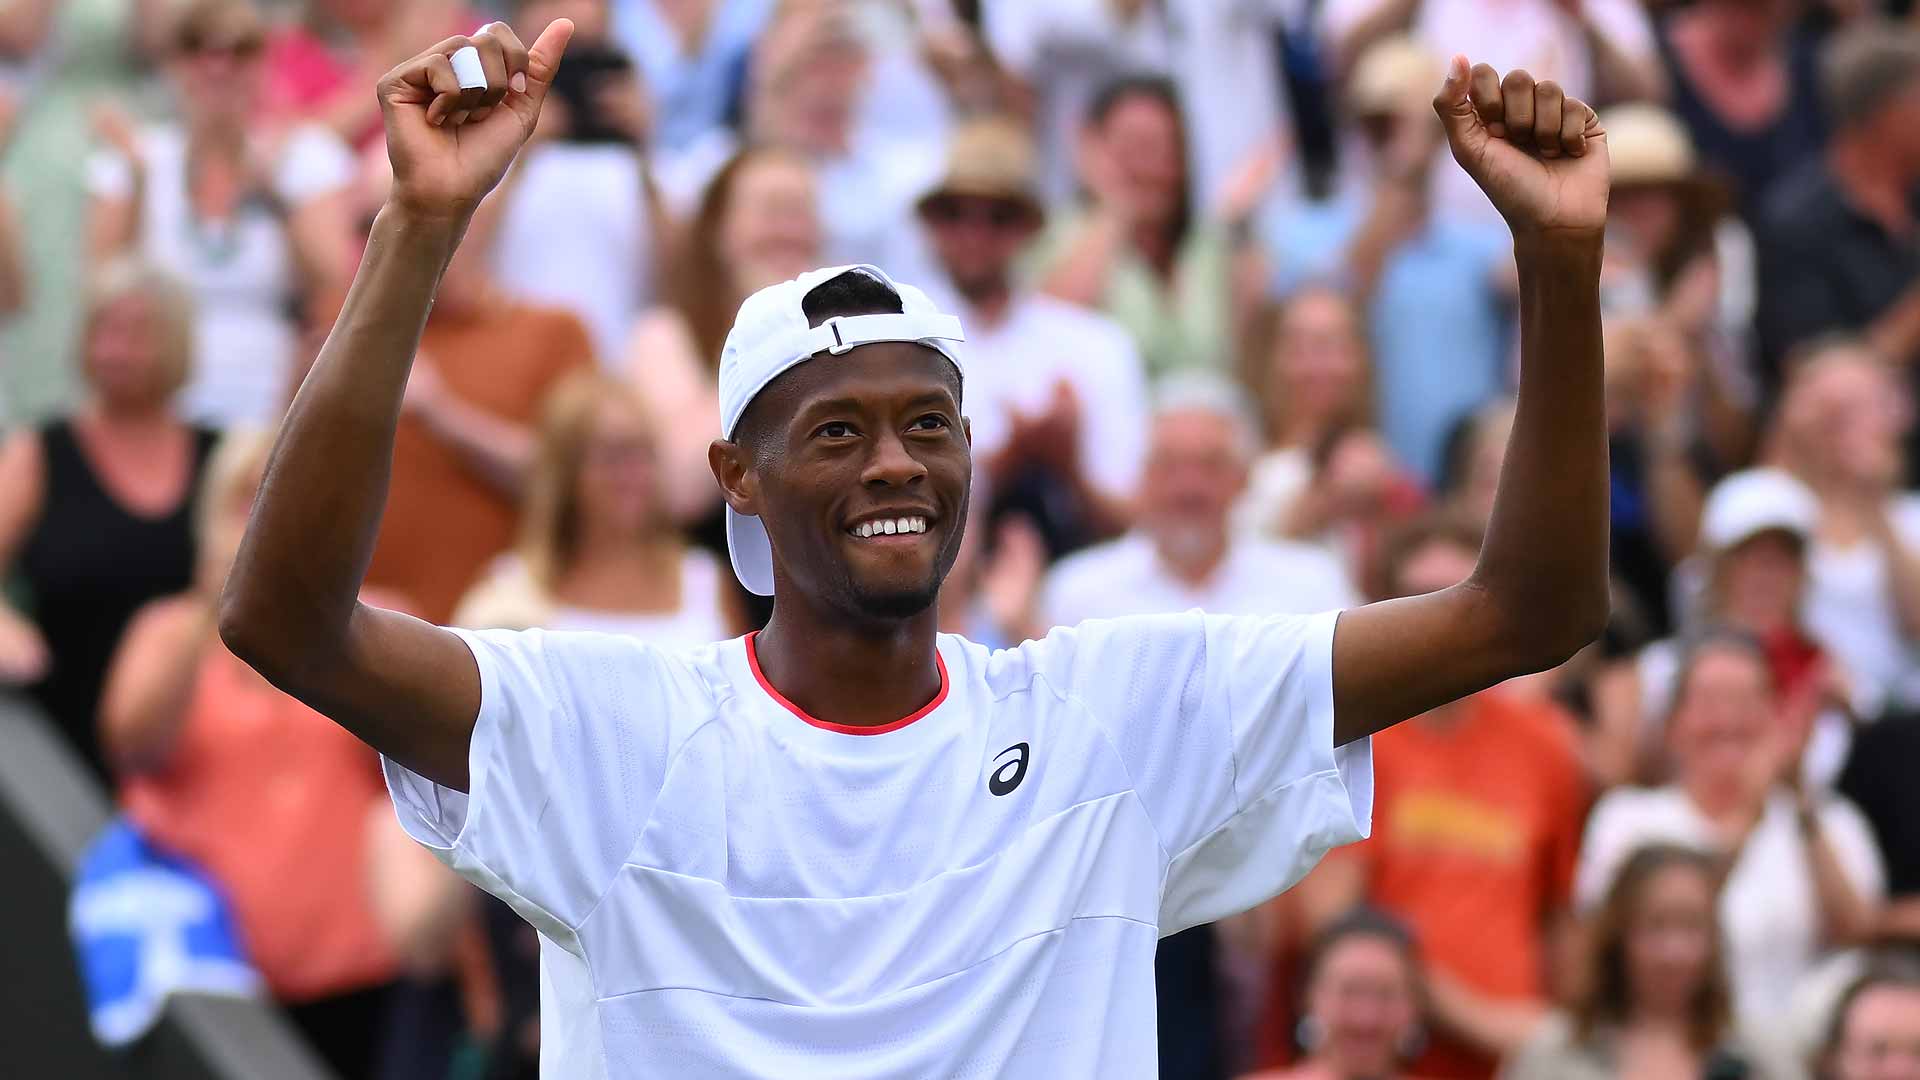 Christopher Eubanks enjoyed the biggest run of his career at Wimbledon, where he reached the quarter-finals.